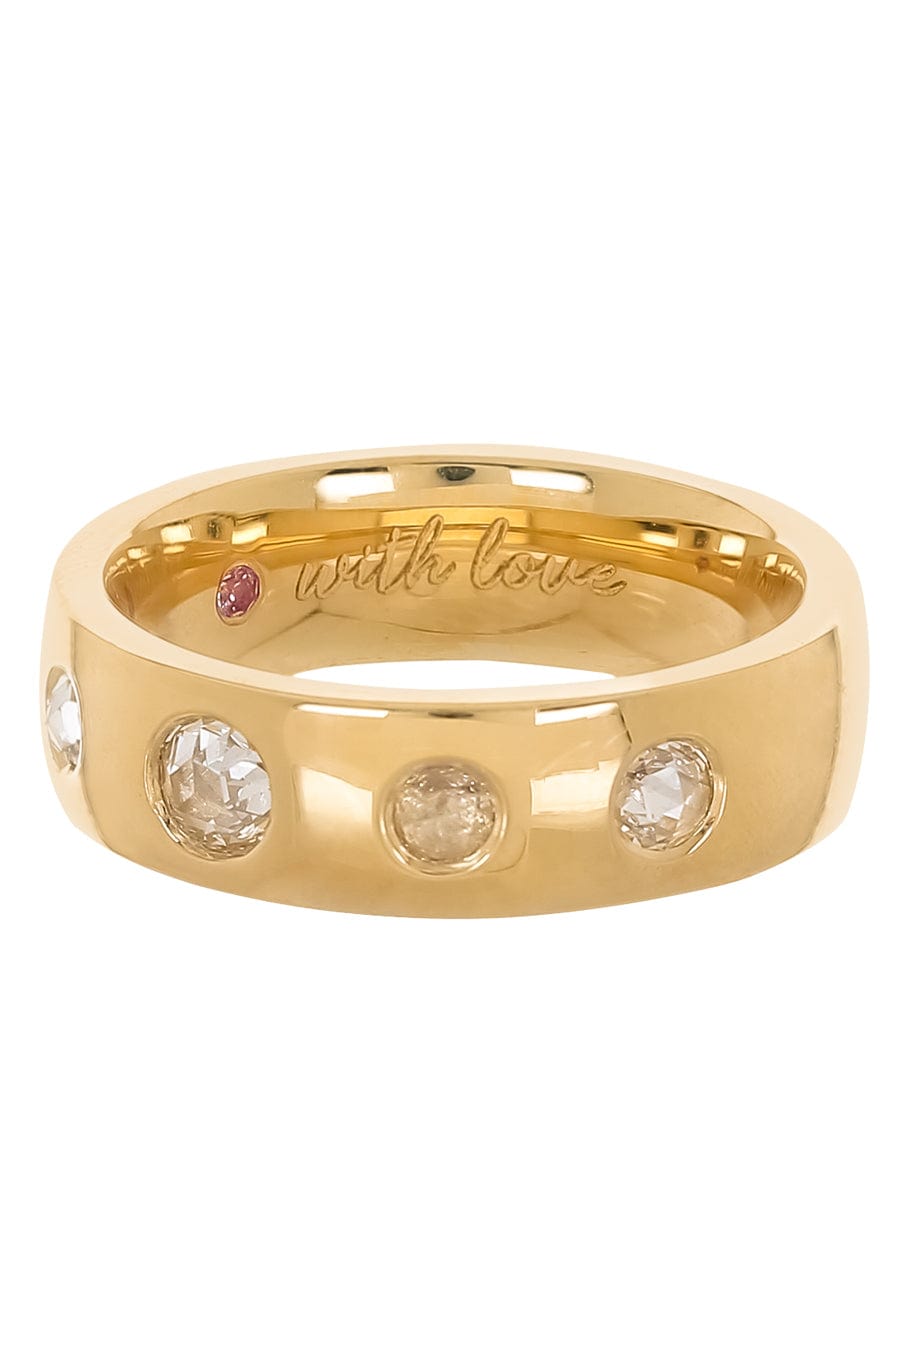 WITH LOVE-Five Diamond Ring-YELLOW GOLD